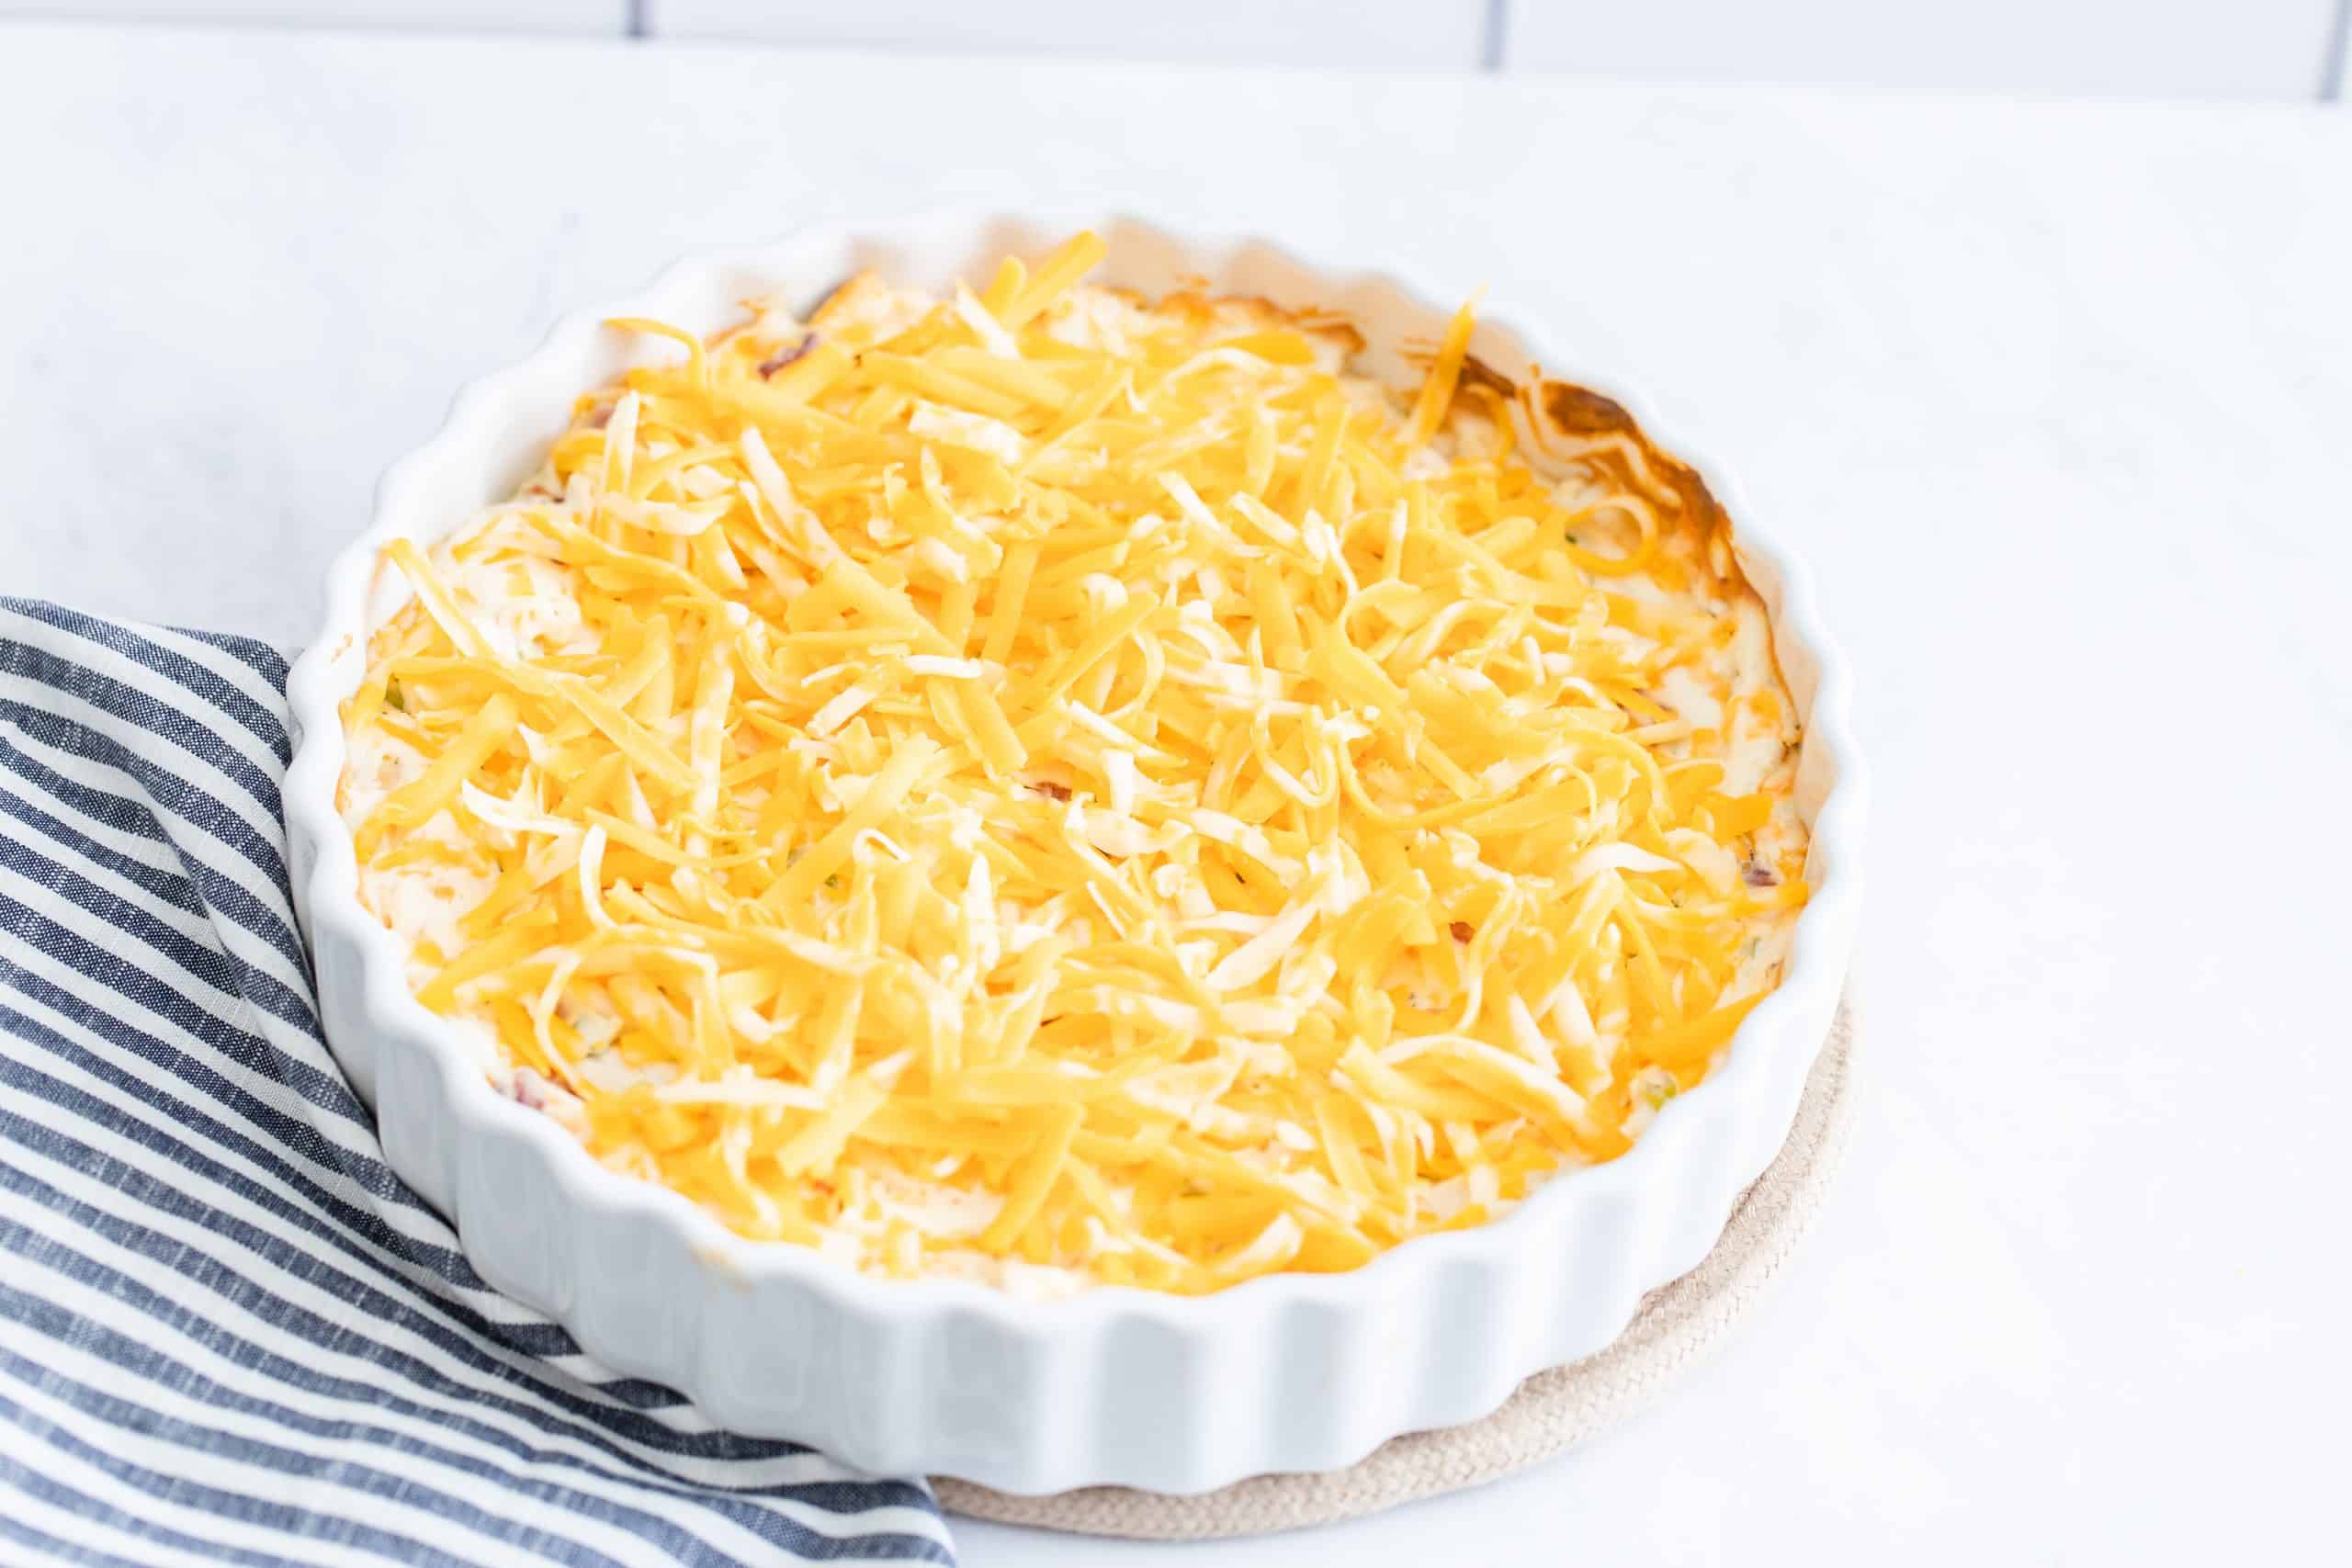 shredded cheese on top of baked cream cheese mixture in a white tart baking dish.